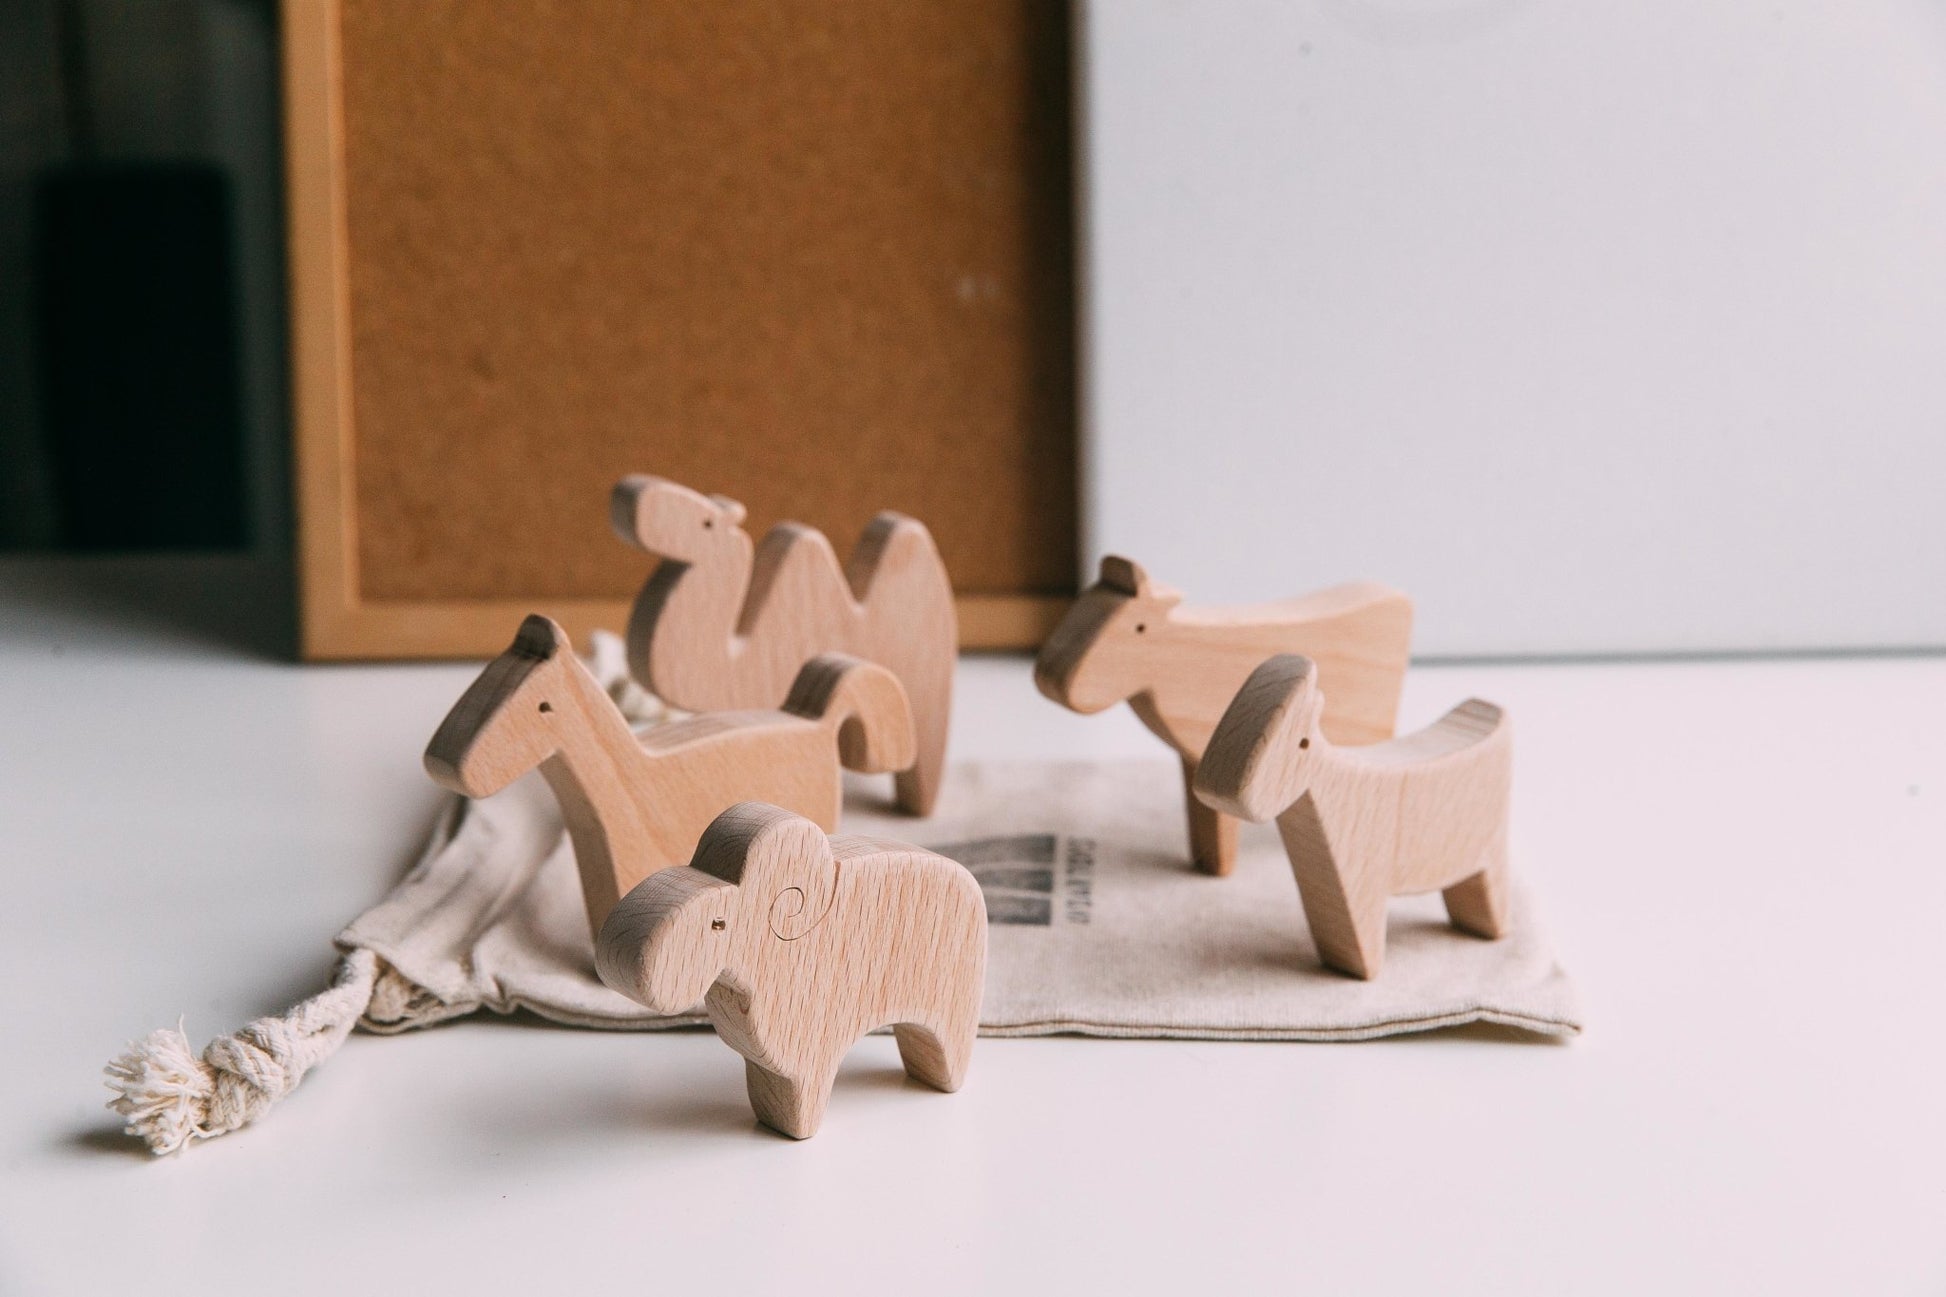 Five Wooden Animals by Avdar - Wood Wood Toys Canada's Favourite Montessori Toy Store